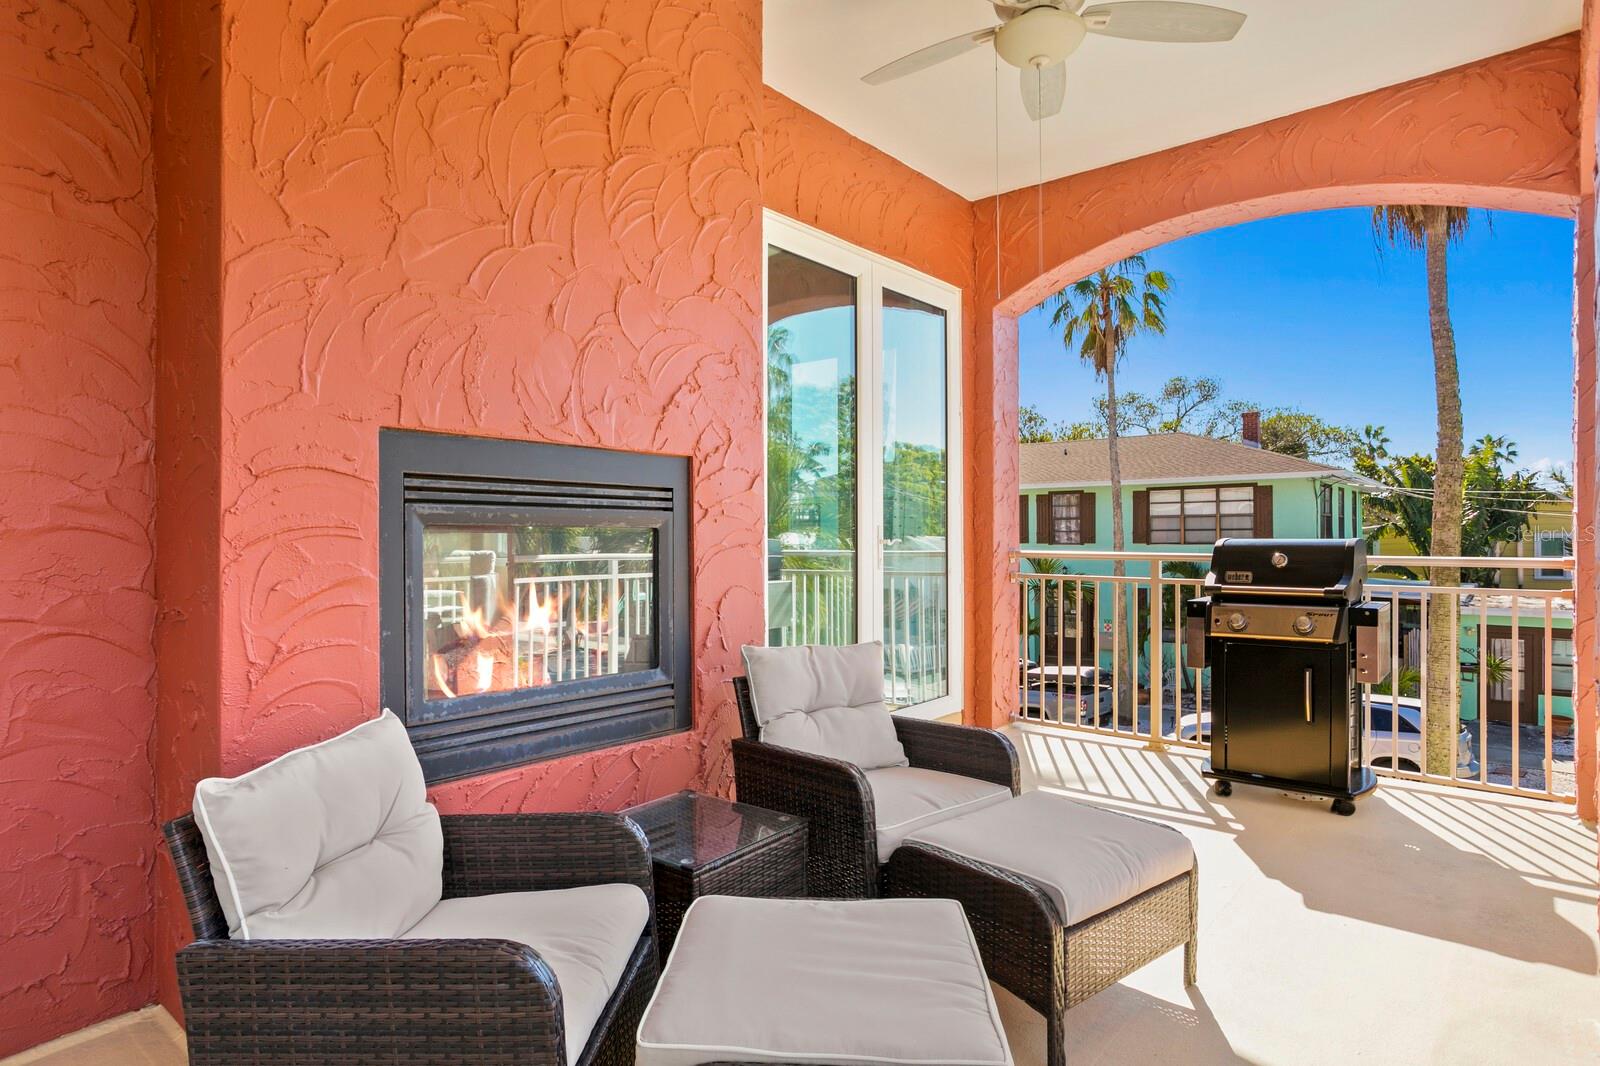 Balcony off living room with double sided fireplace